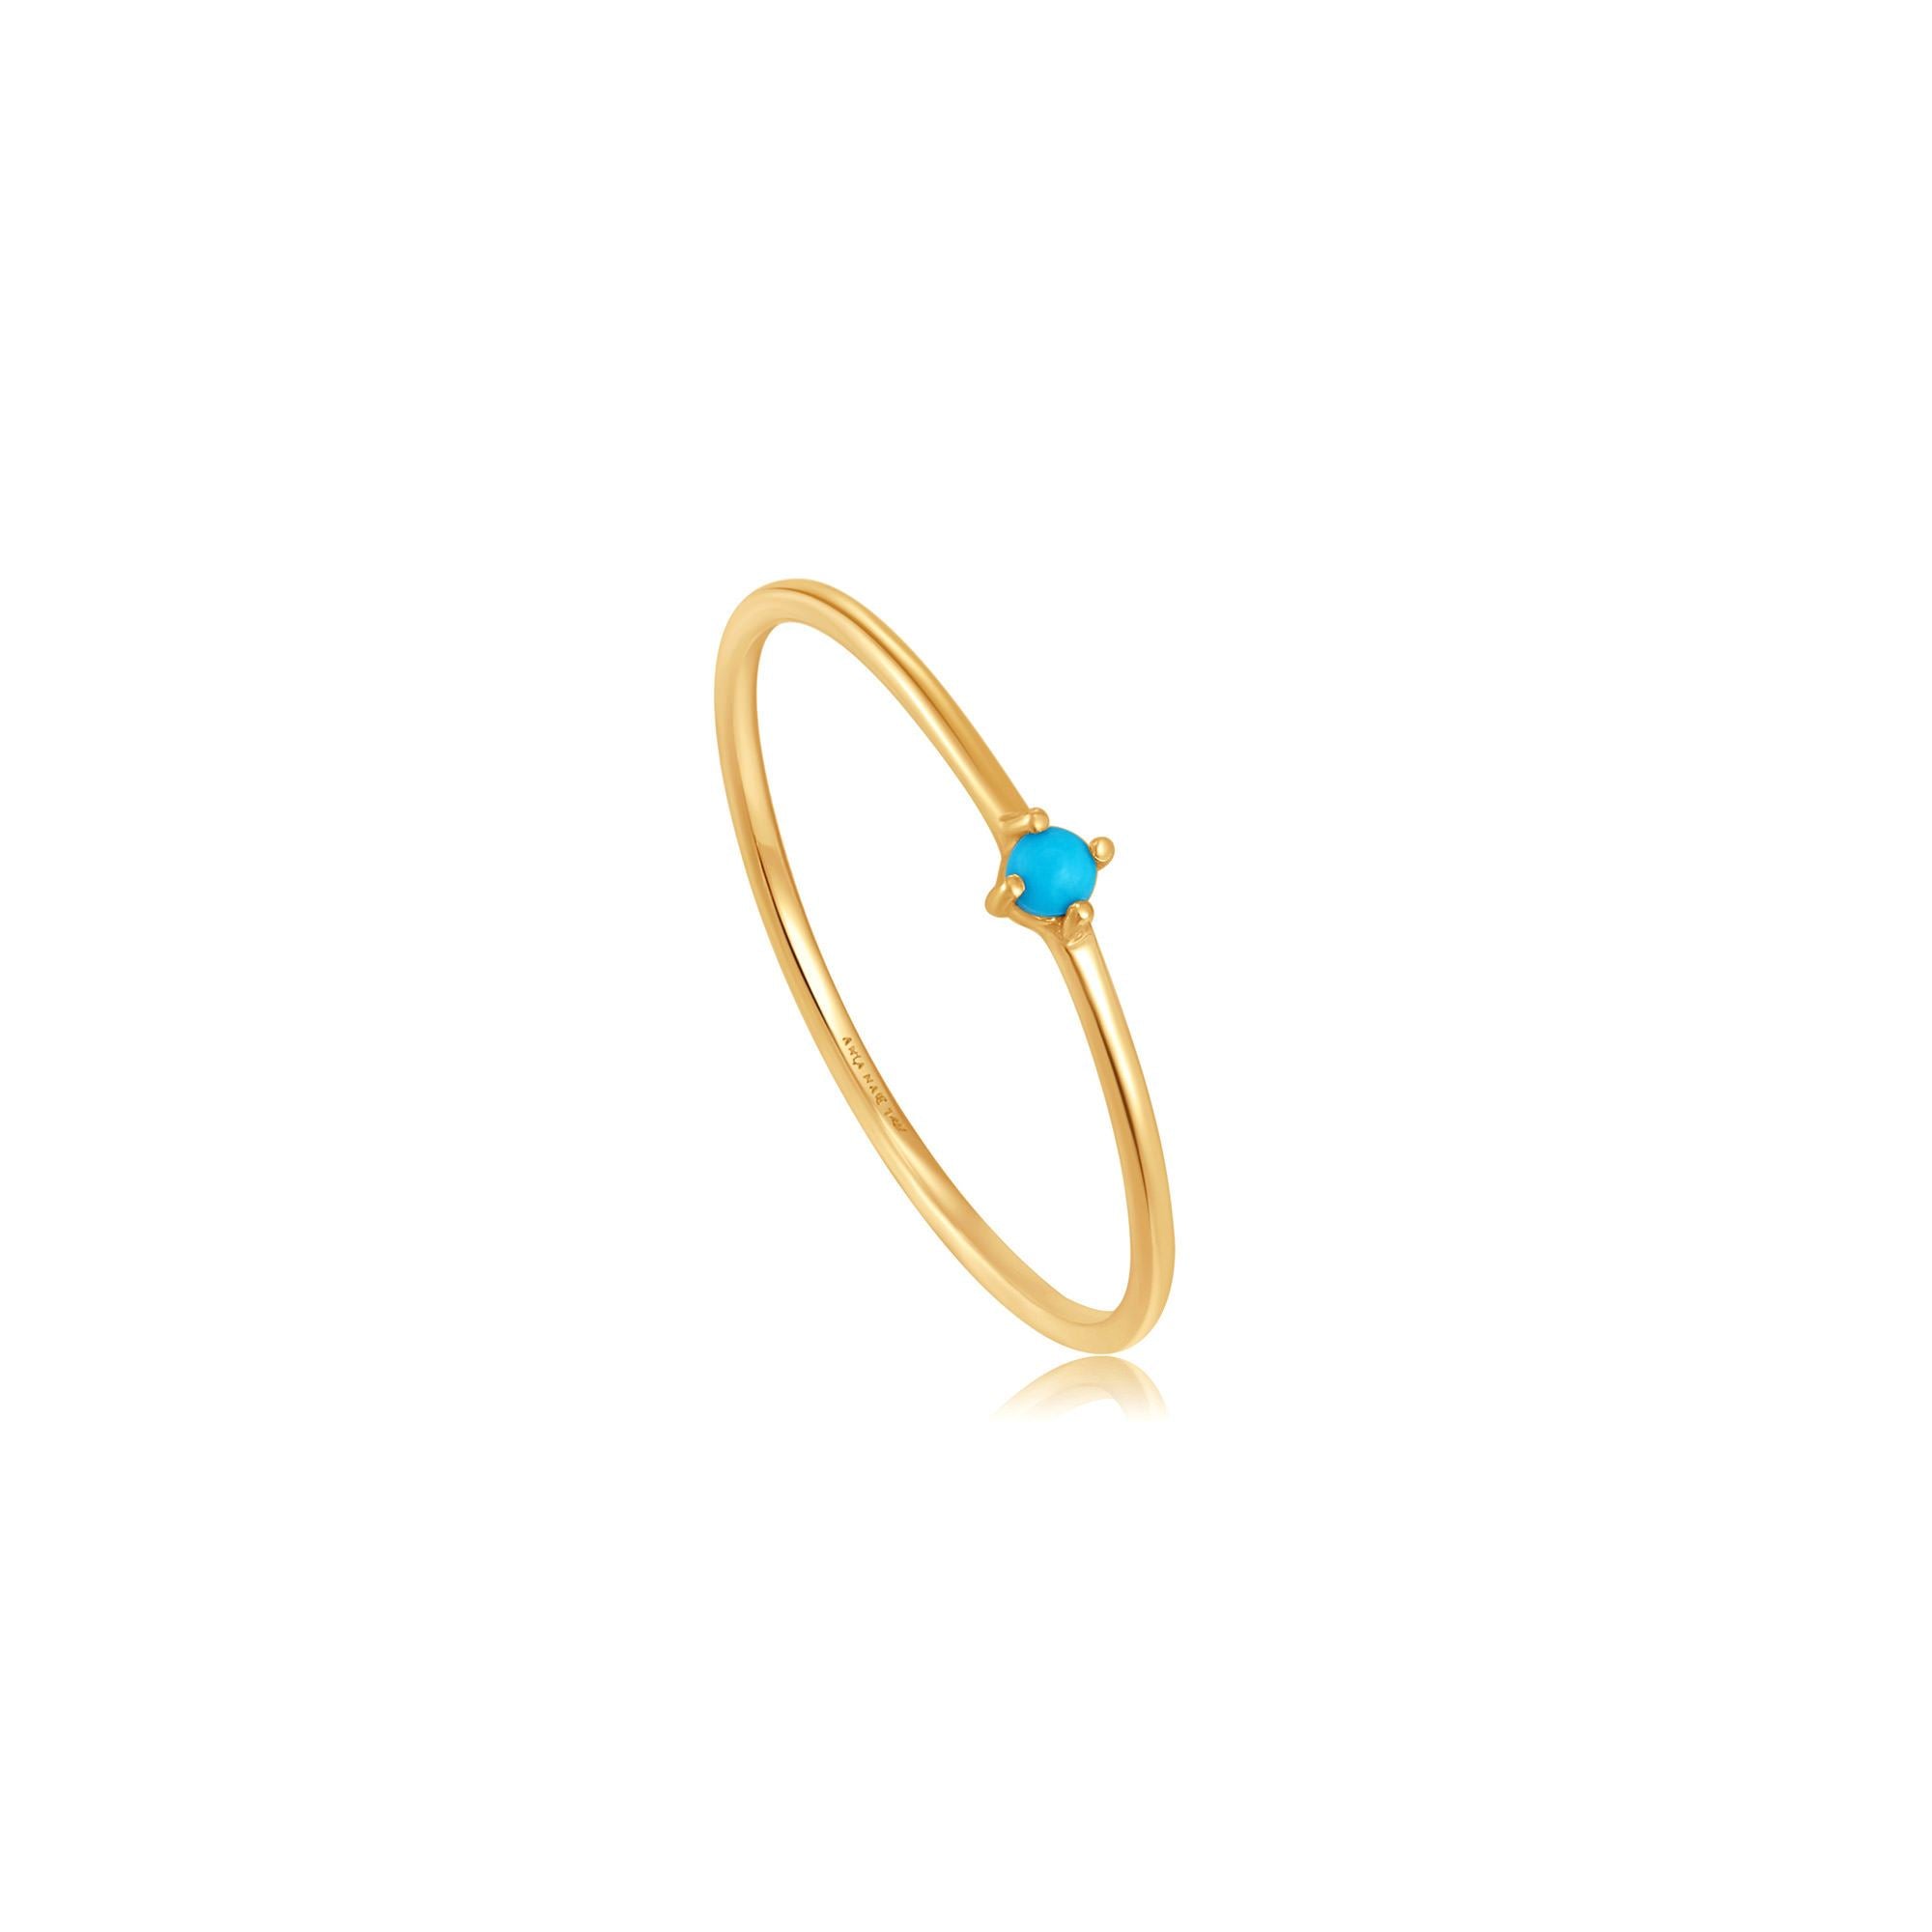 Ania Haie 14kt Gold Turquoise Stone Ring